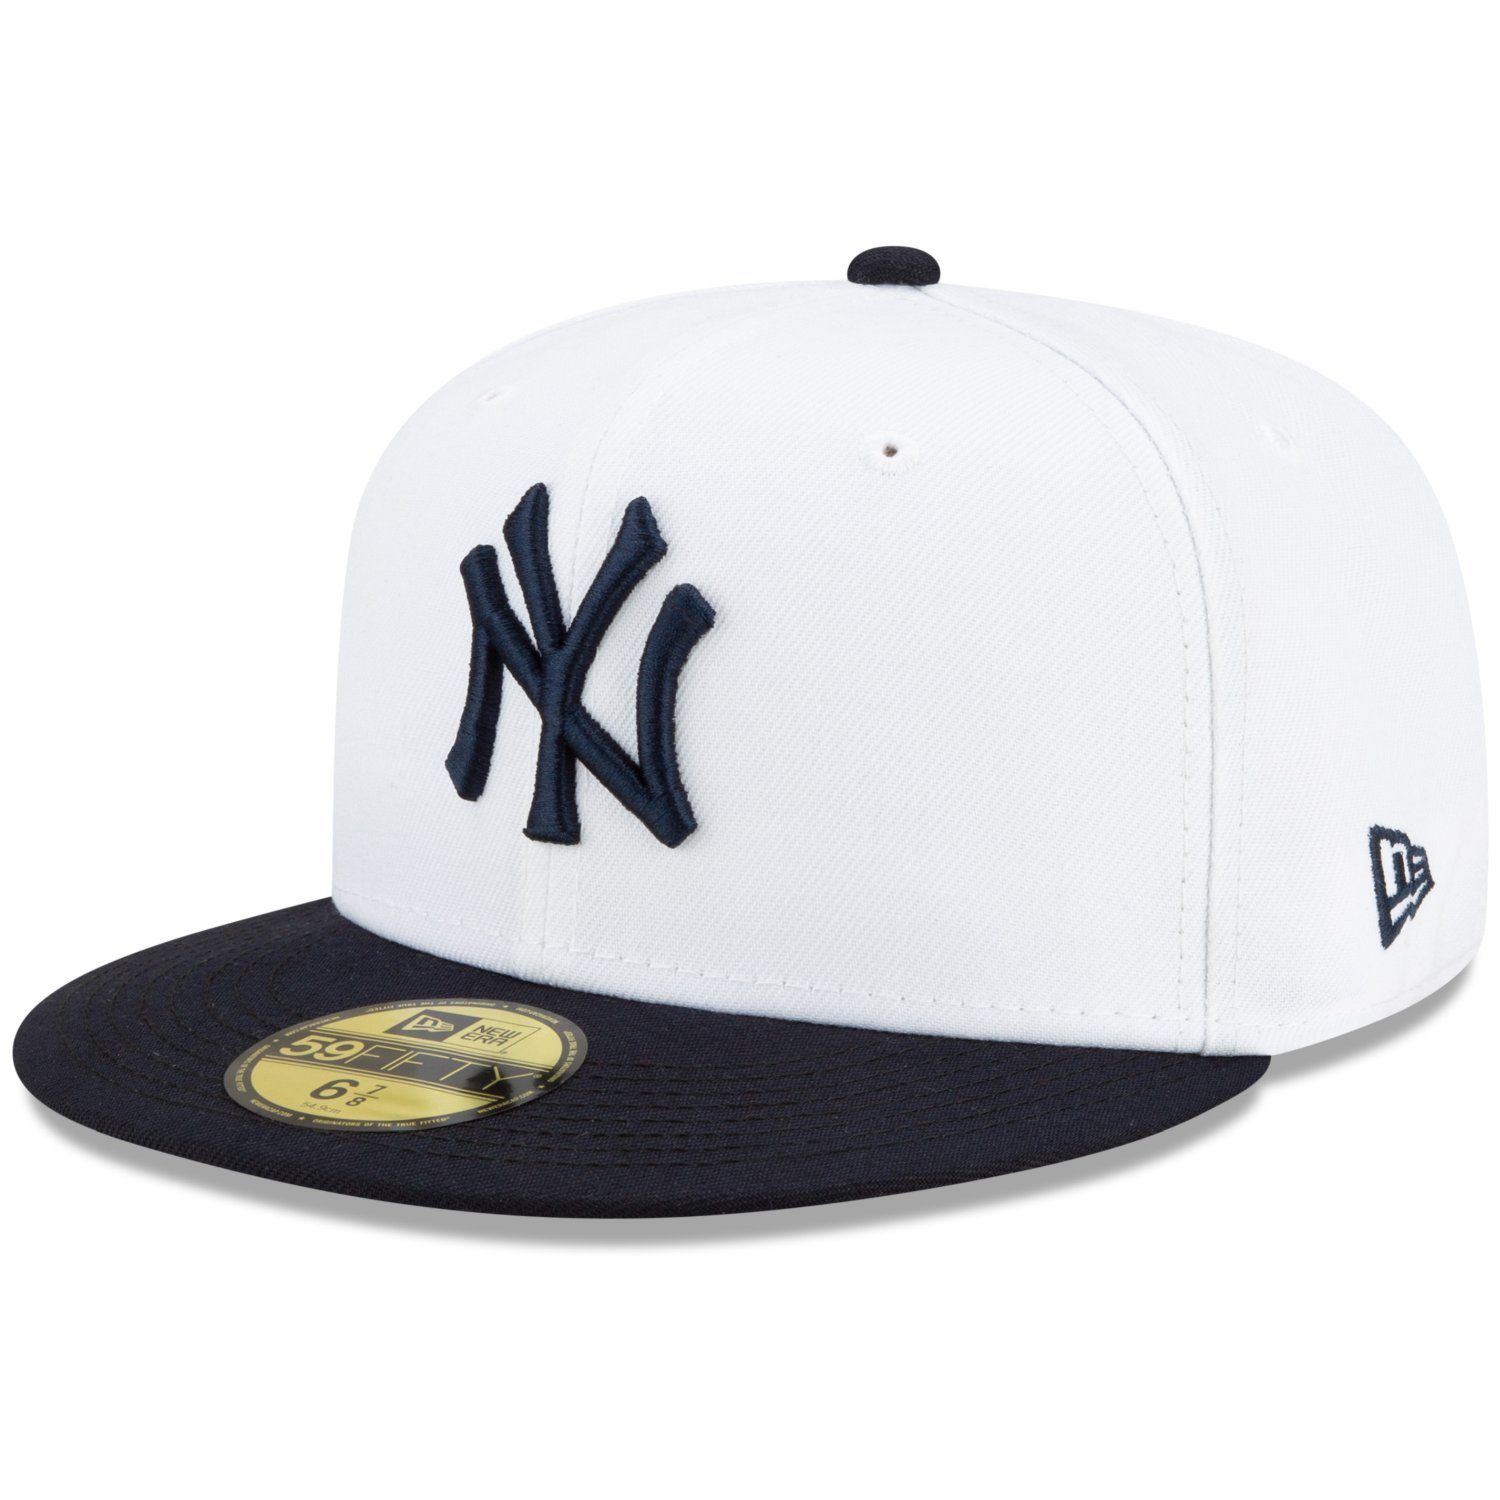 Fitted 1996 Cap WORLD NY New SERIES Era 59Fifty Yankees